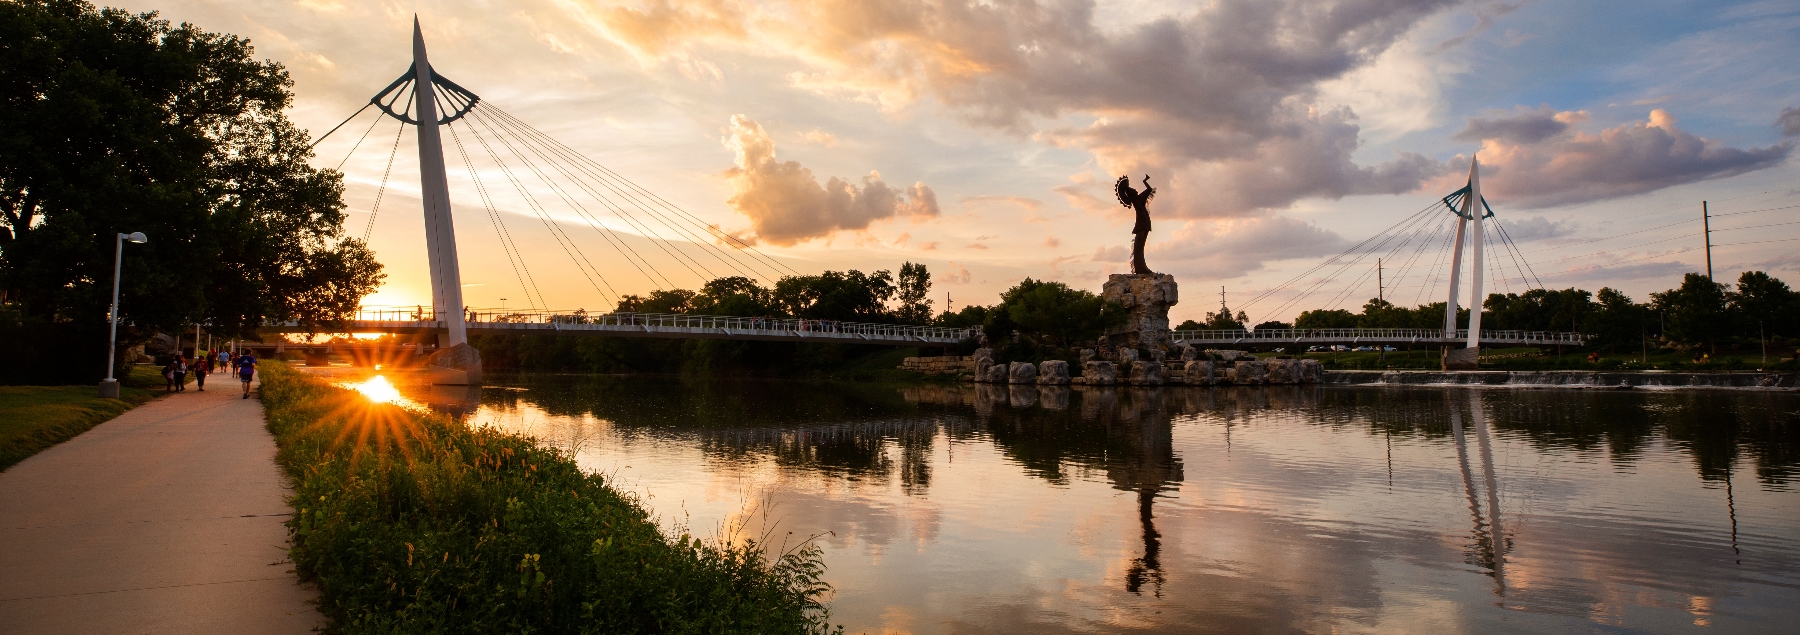 Wide angle shot of the Keeper of the Plains at dusk from the south bank of the river in Wichita